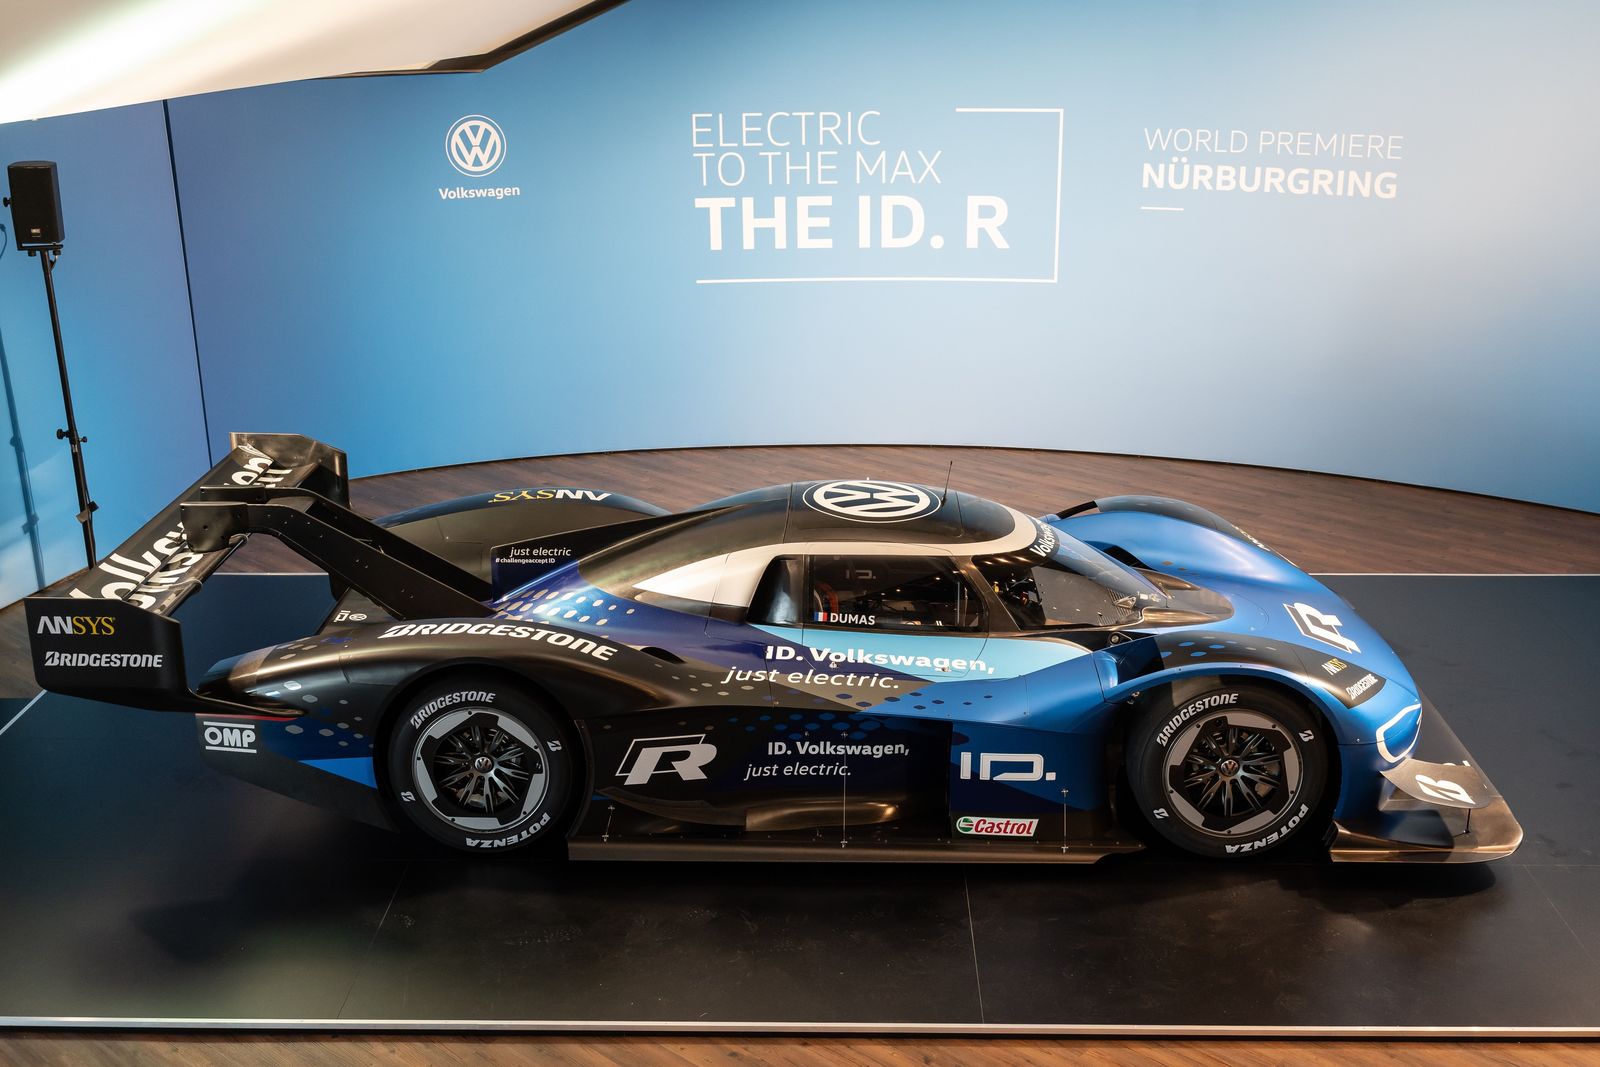 Motorsport with electric drive: Double world premiere for the new Volkswagen ID. R